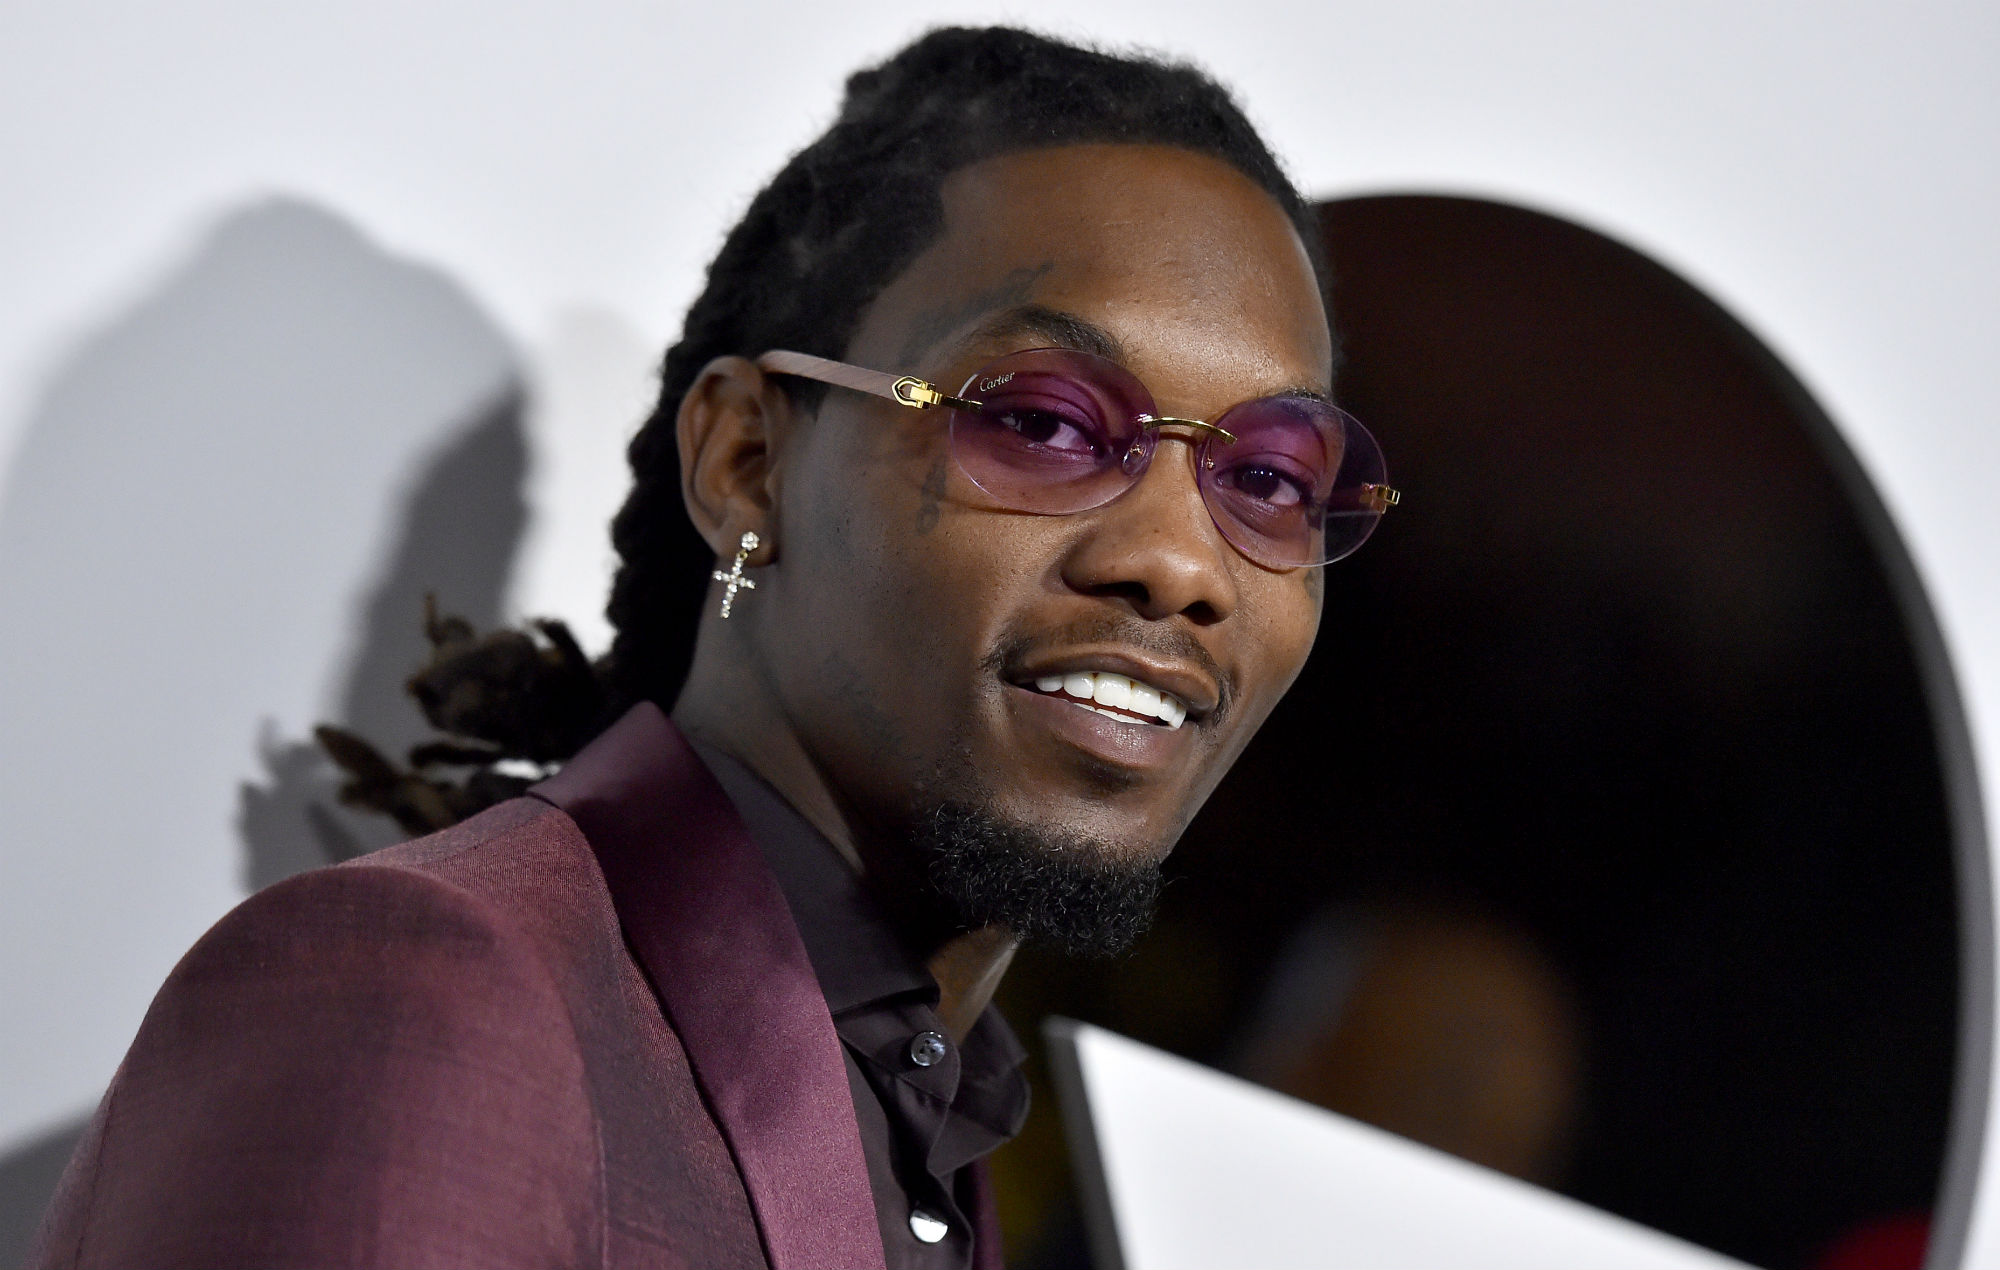 offset-throws-lavish-32nd-birthday-bash-surrounded-by-women-amidst-marital-issues